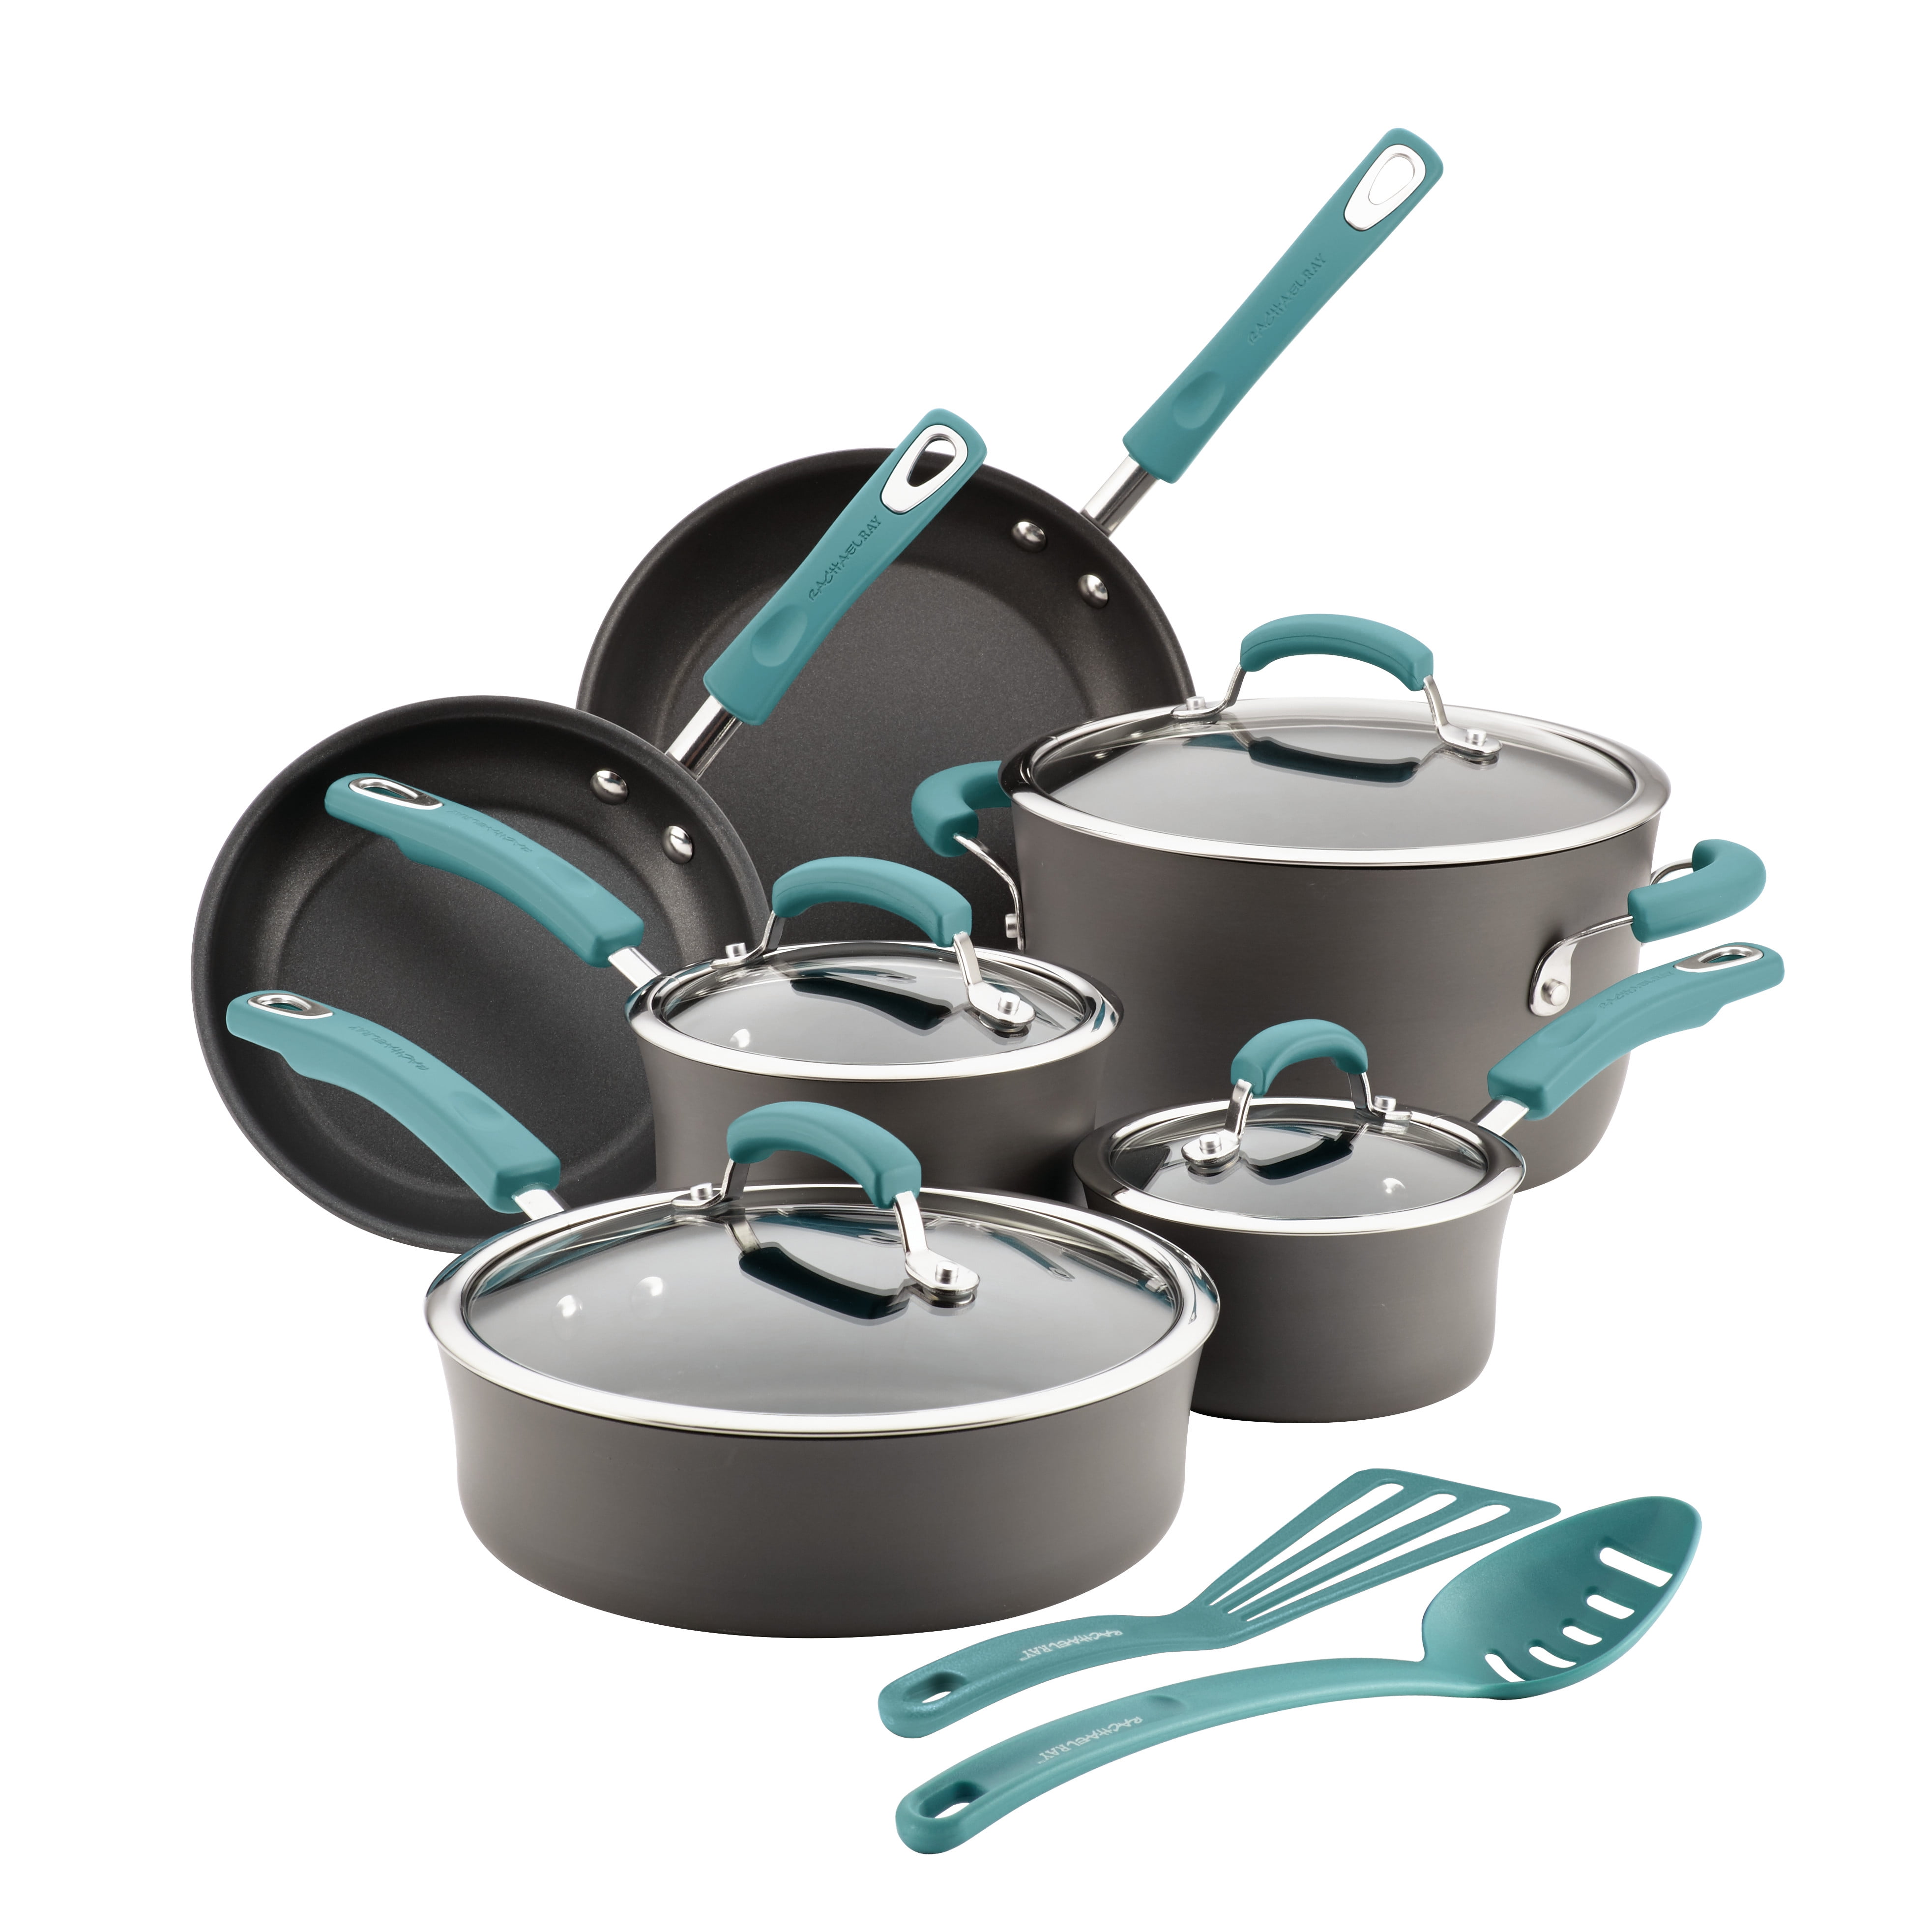 Rachael Ray Classic Brights Hard Anodized Nonstick Cookware Pots and Pans Set Agave Blue 15 Piece